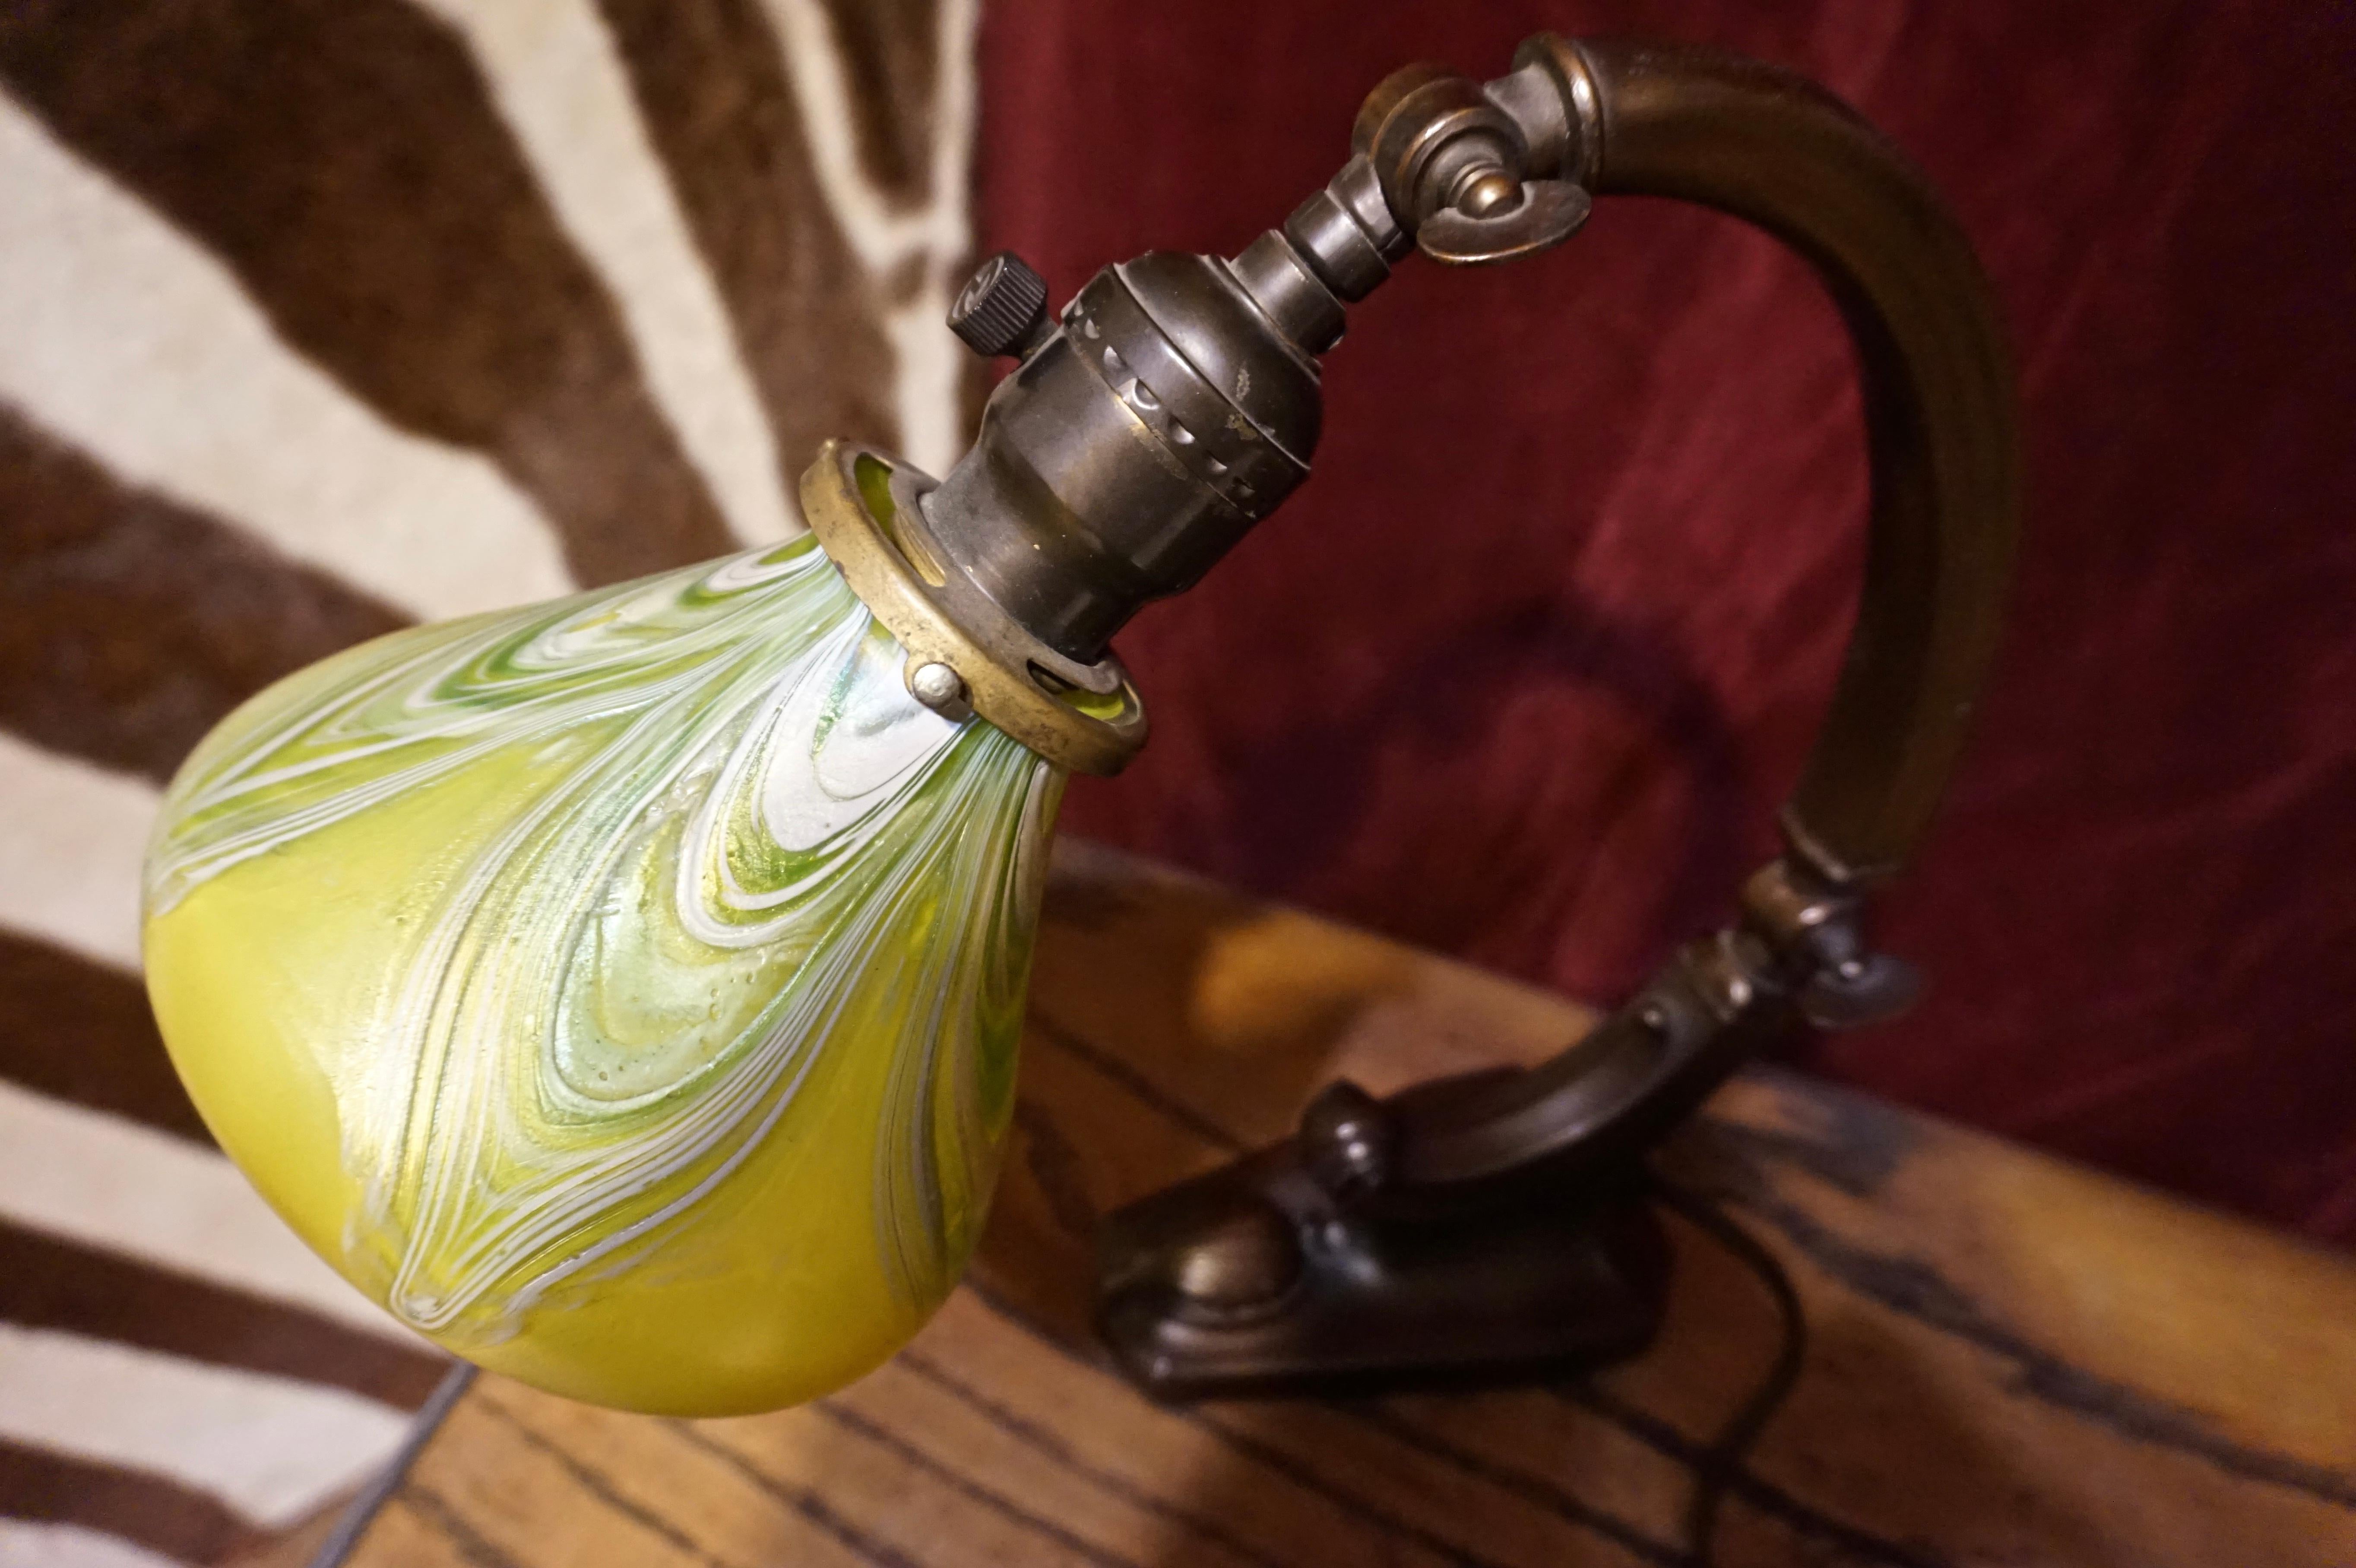 Beautiful Art Nouveau stained glass lamp in working condition. Adjustable, curving brass stem. Throws a warm light while projecting aesthetic perfection. In the Tiffany style for a fraction of the price. Sturdy.